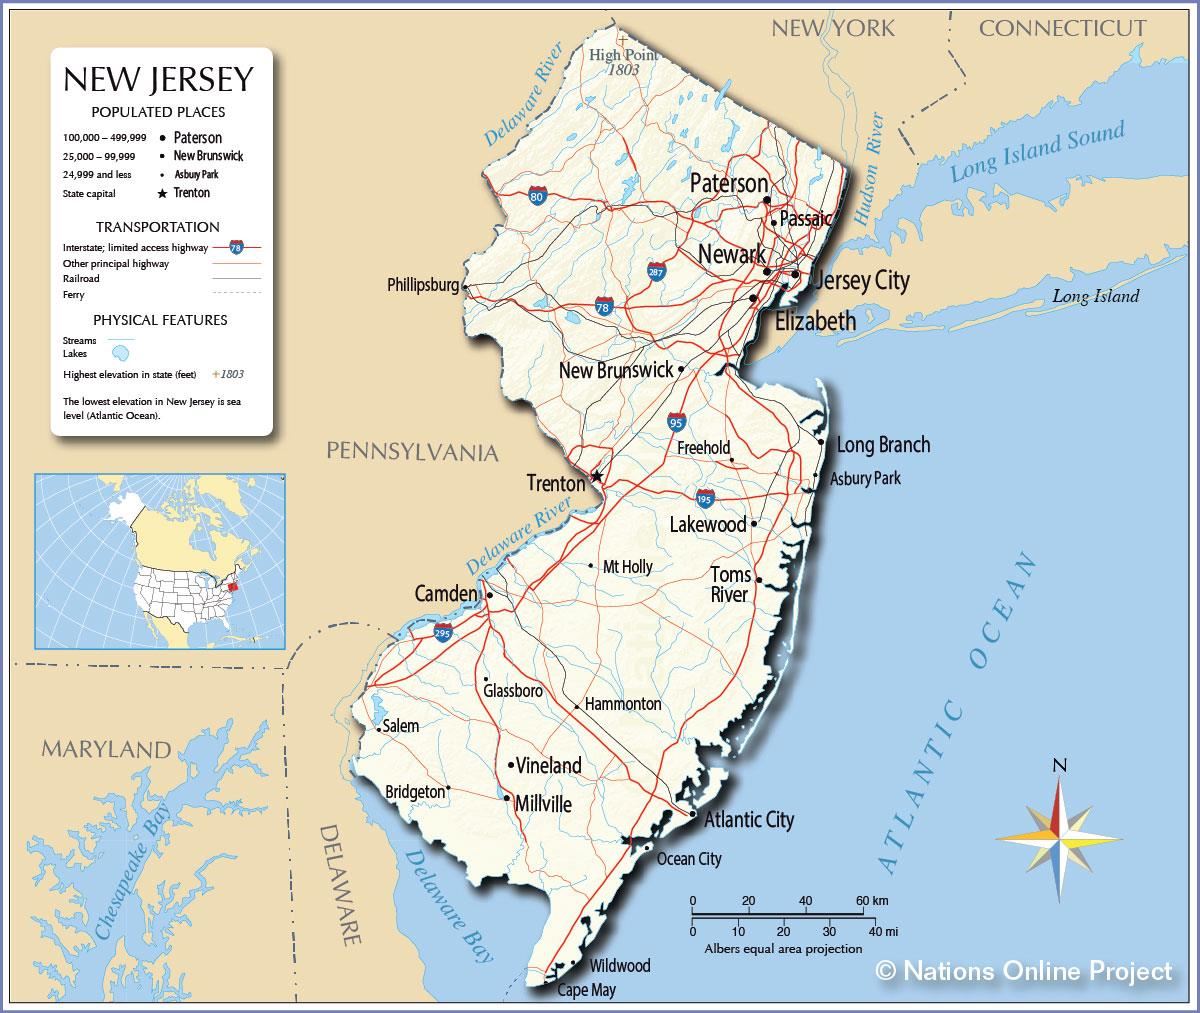 New Jersey Map | Fotolip.com Rich image and wallpaper